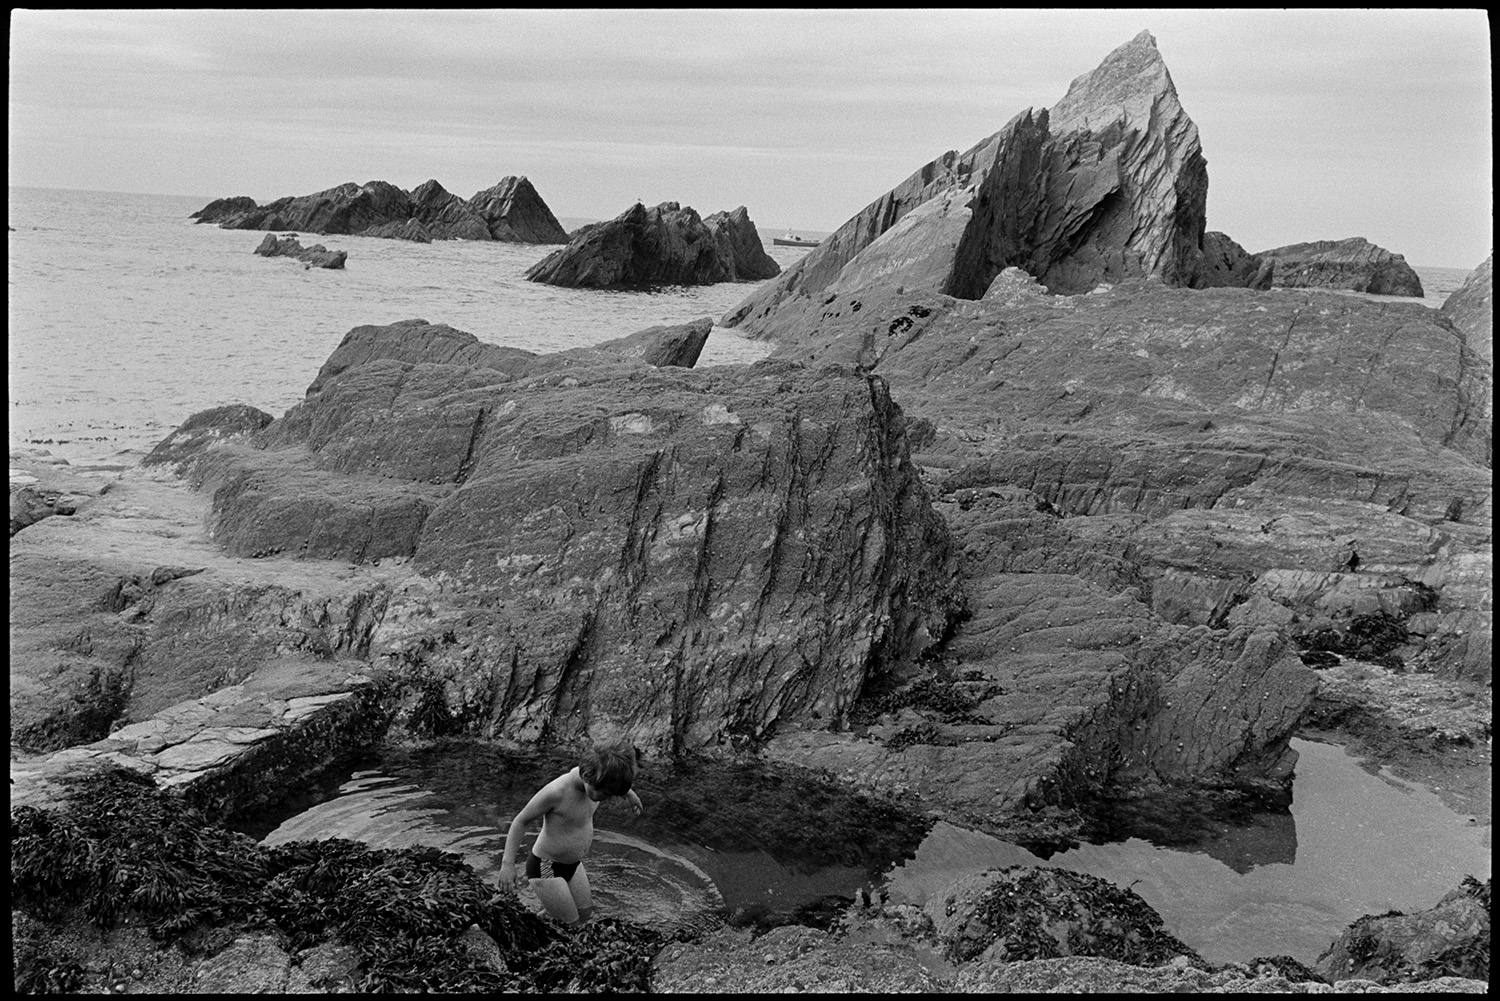 Entrance to tunnel and rocky beach with shop. People climbing on rocks. Boats. 
[A child exploring rock pools on a rocky outcrop from the cliffs at Ilfracombe beach.]